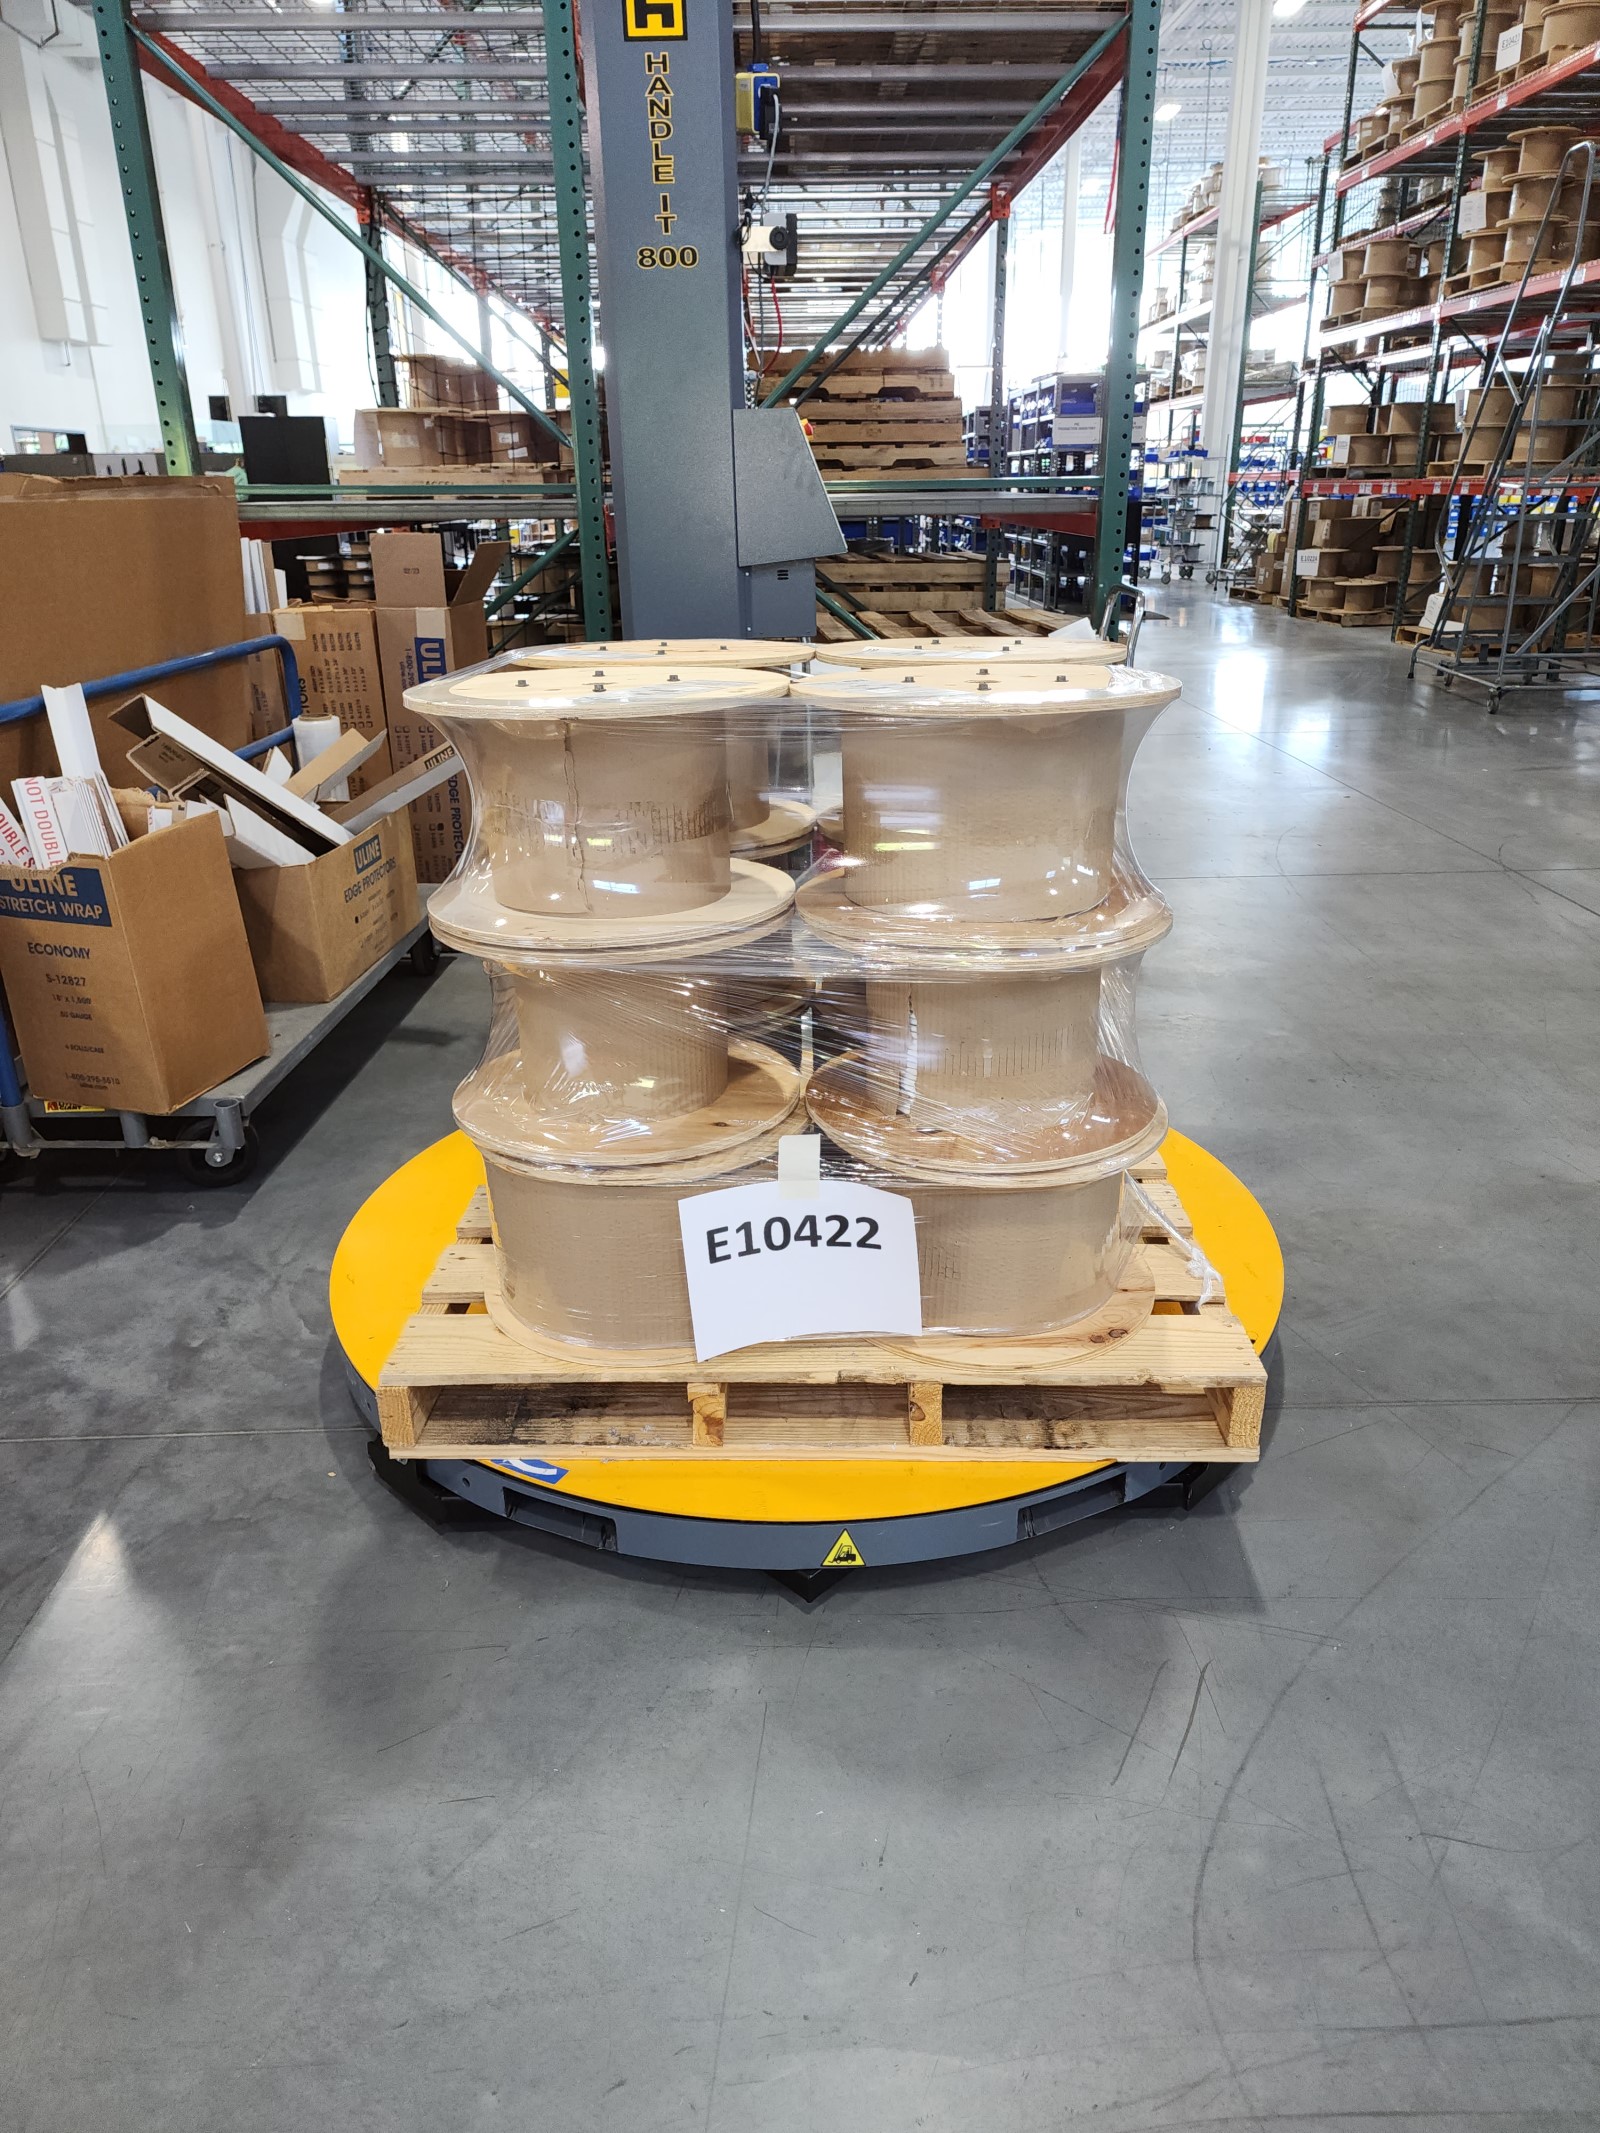 An pallet of wire spools, securely stretch wrapped by the Handle It 800 semi-automatic pallet wrapper.